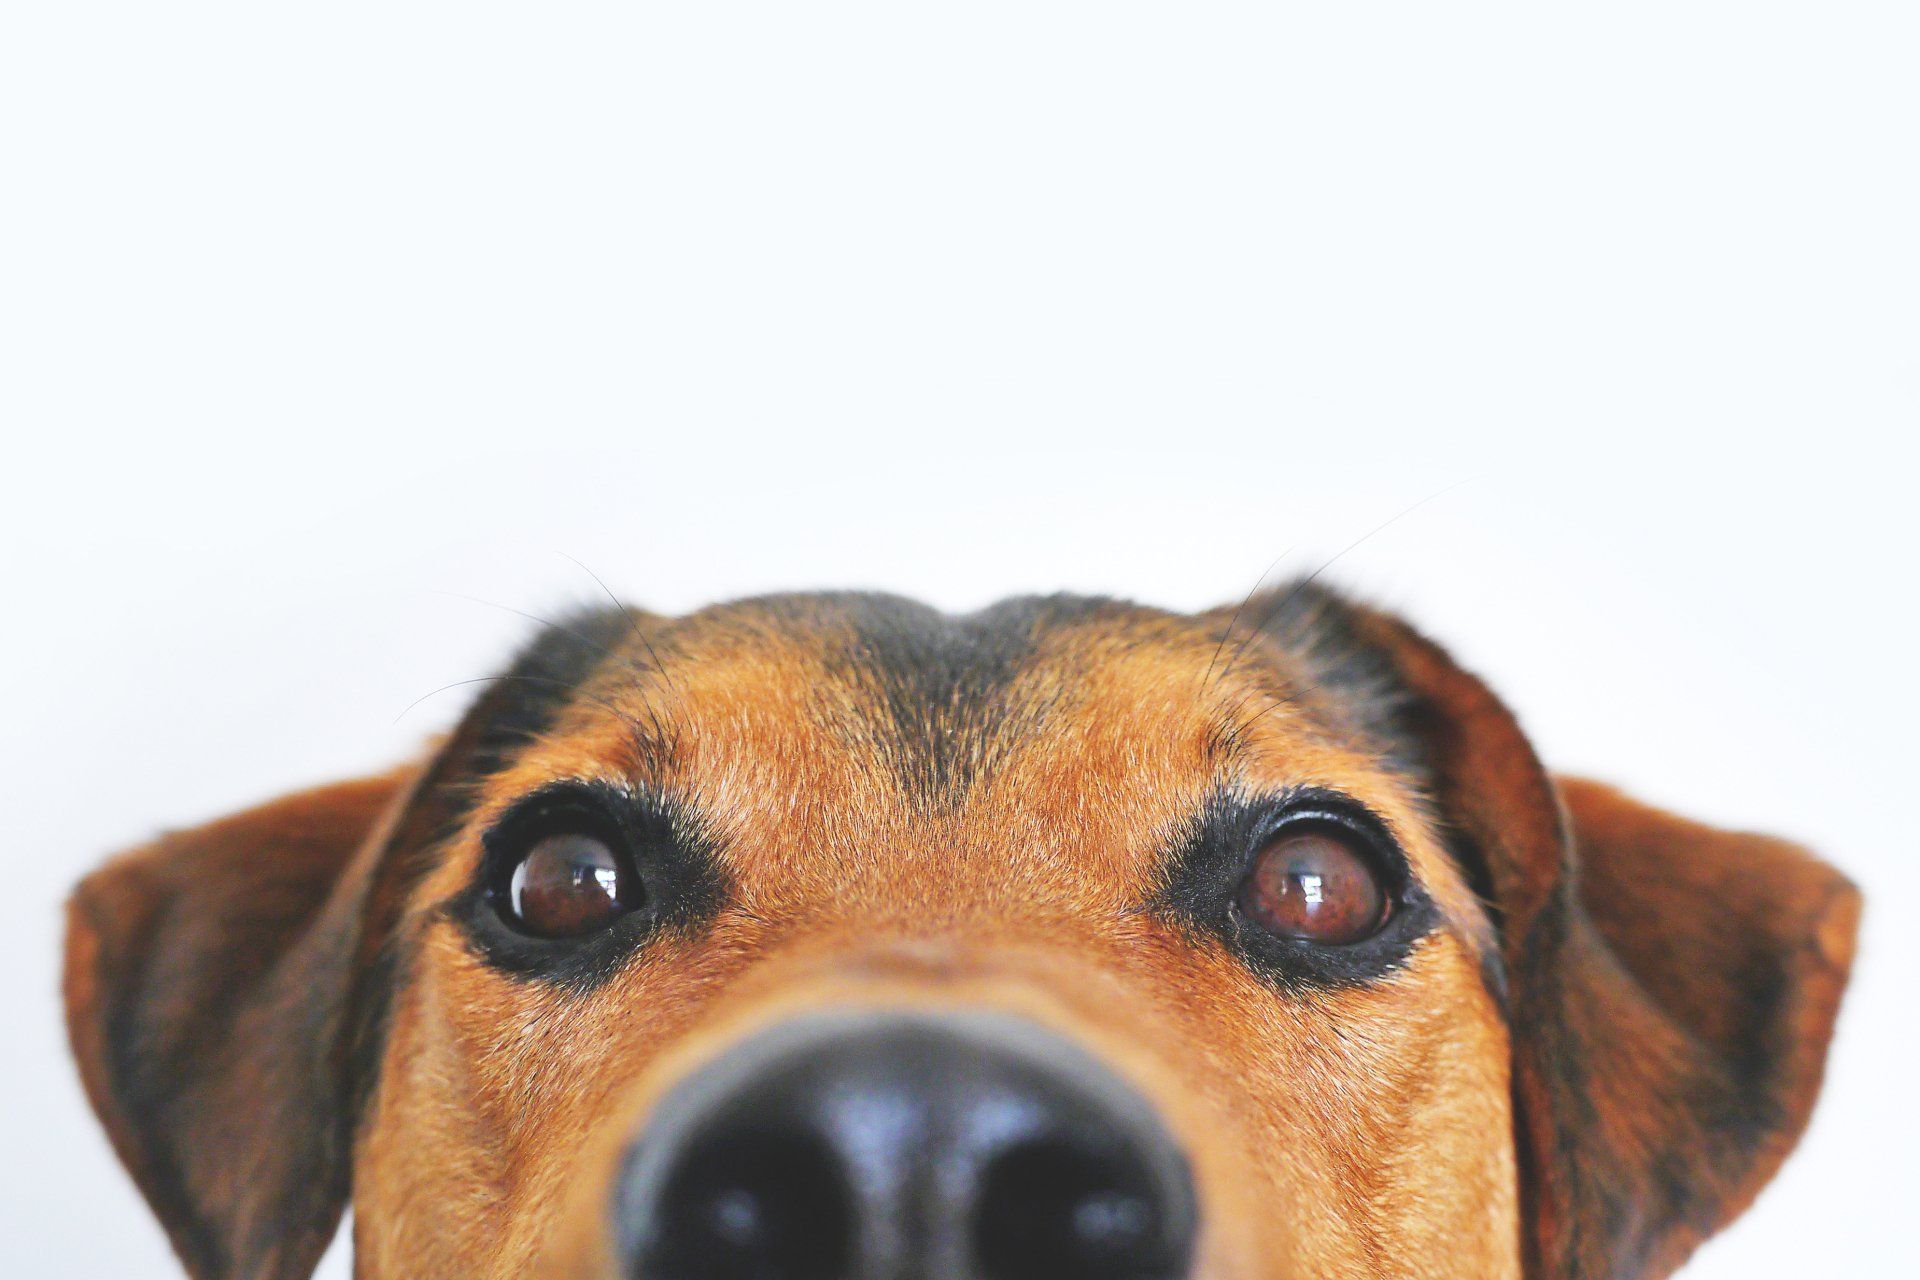 A close up of a brown dog 's face against a white background.